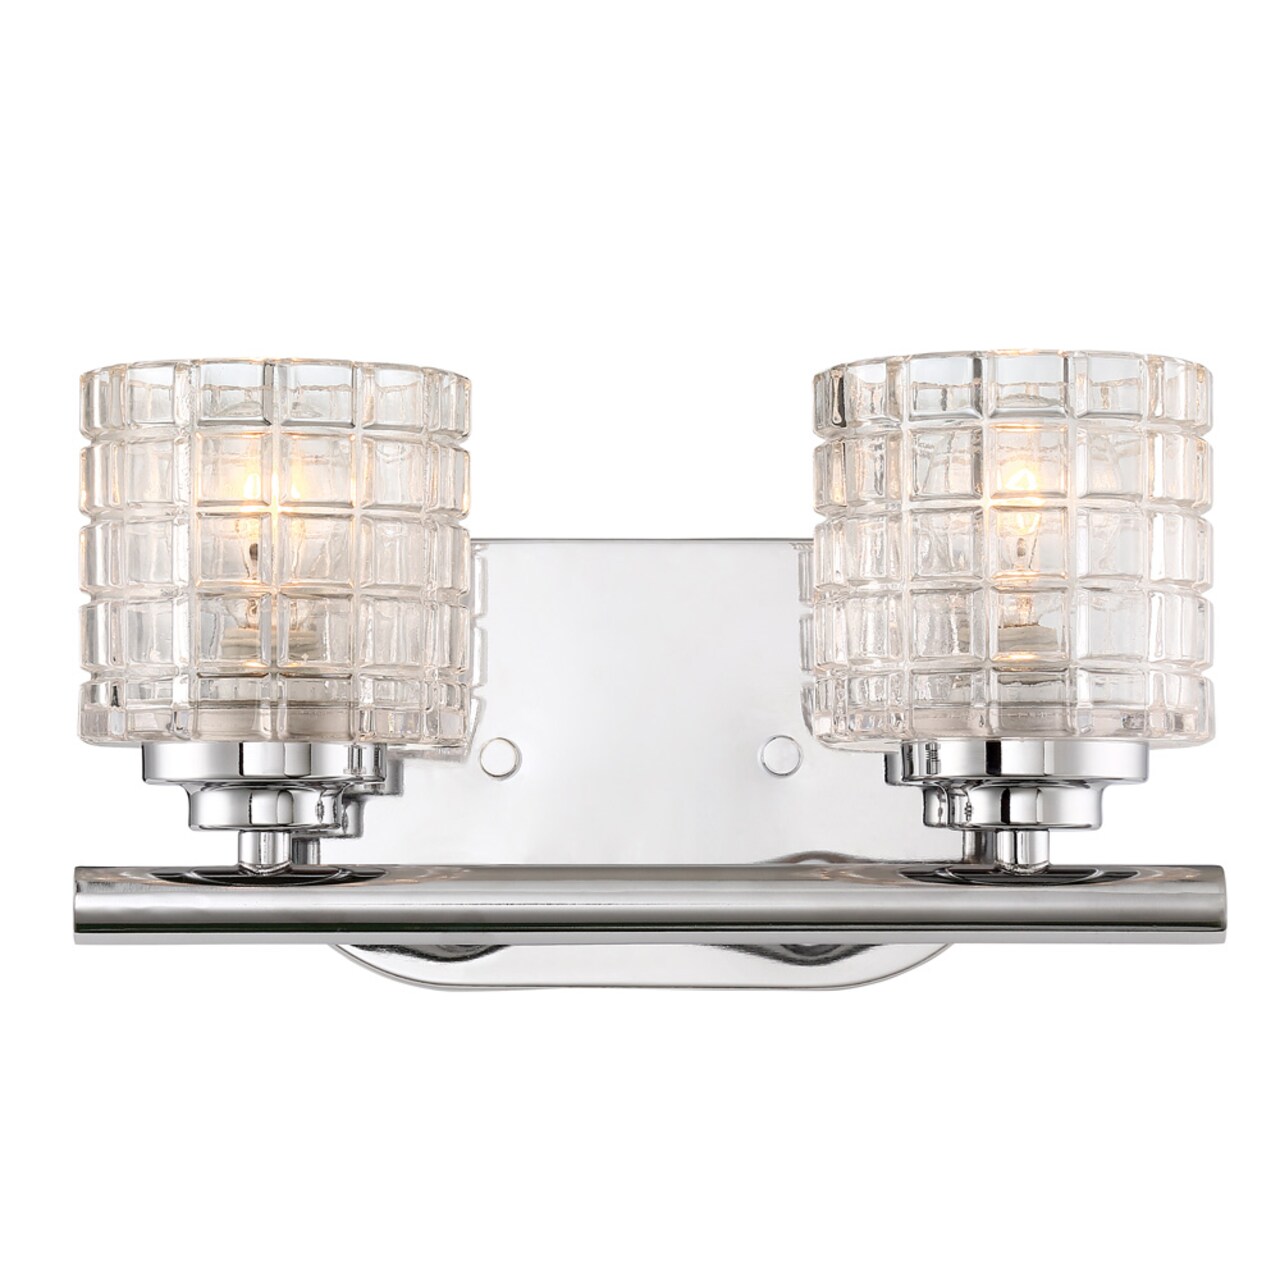 Votive 2-Light Wall Mounted Vanity &#x26; Wall Light Fixture in Polished Nickel Finish